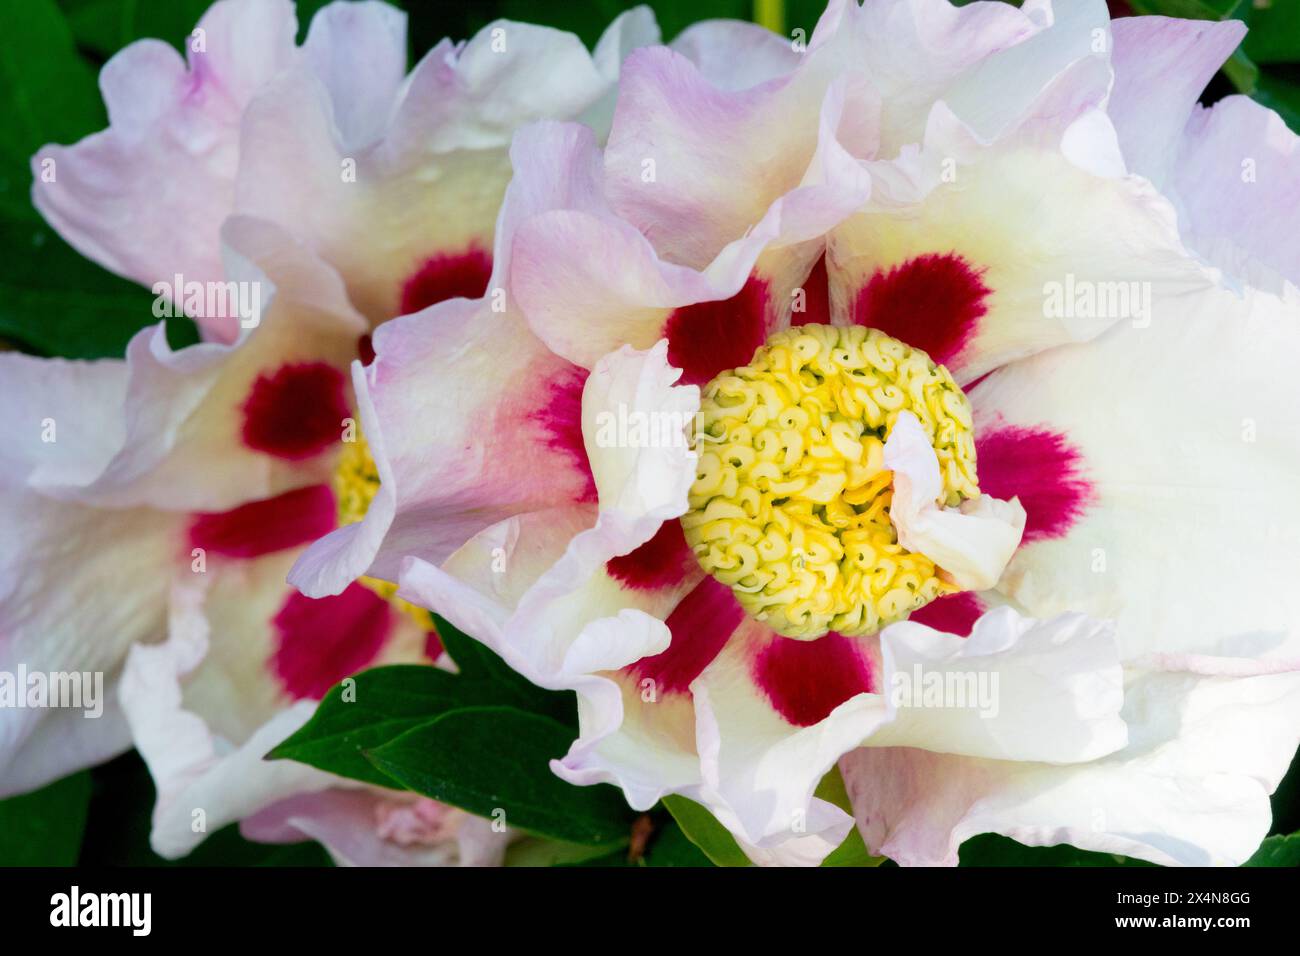 White Paeonia 'Pastel Splendor' intersection Itoh Peony Paeonia Hybrid Flower Heads Banque D'Images